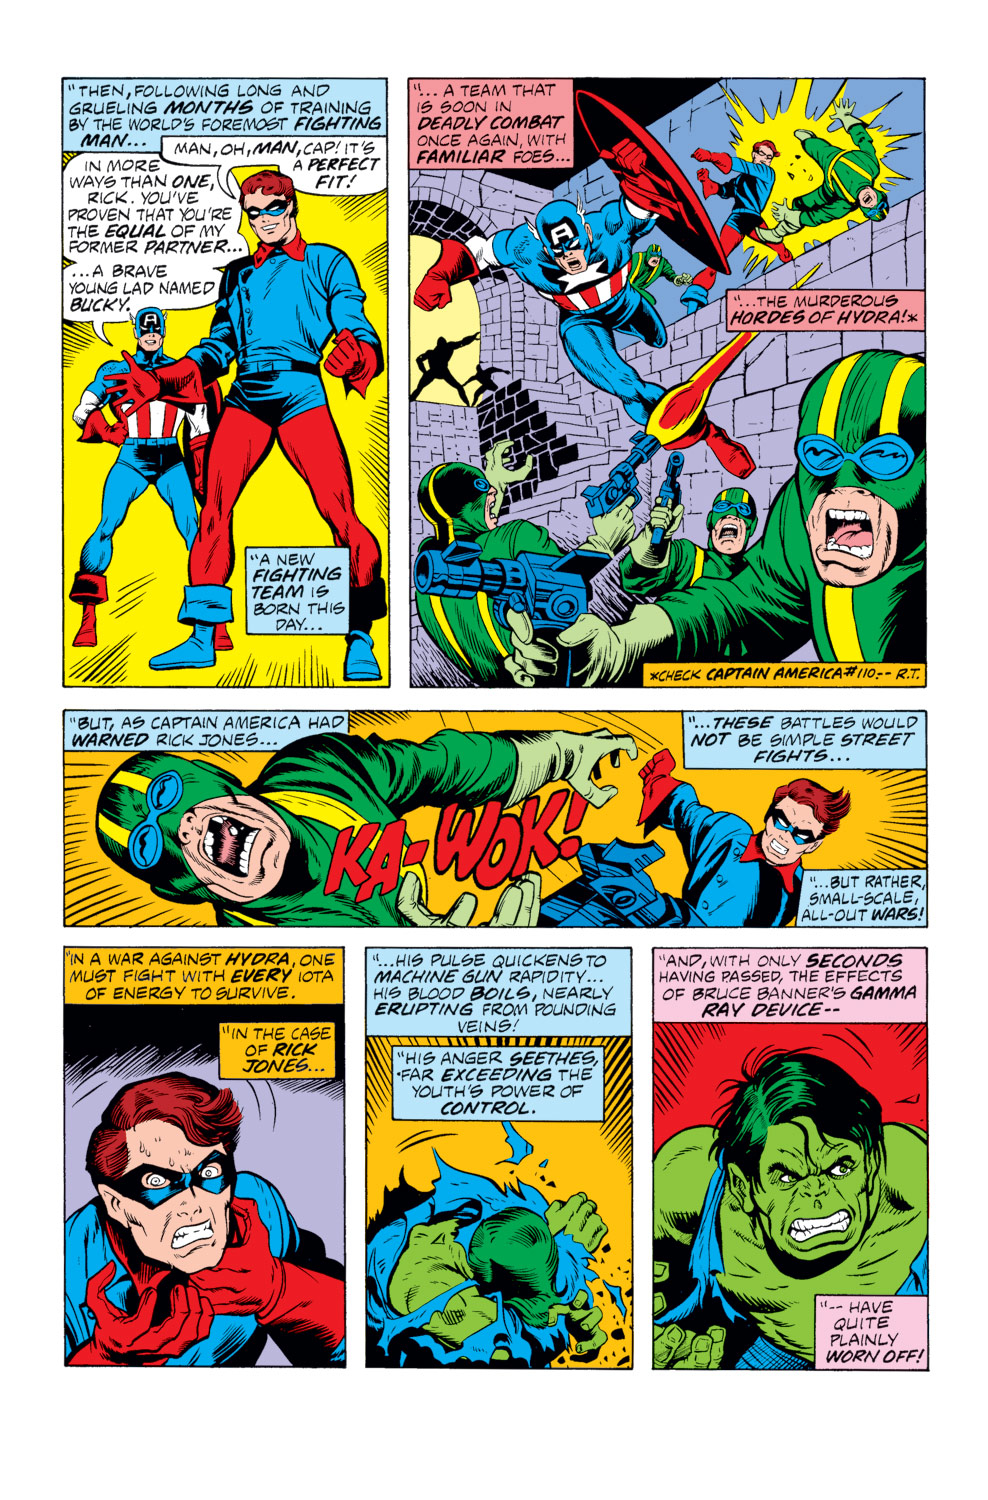 What If? (1977) issue 12 - Rick Jones had become the Hulk - Page 15